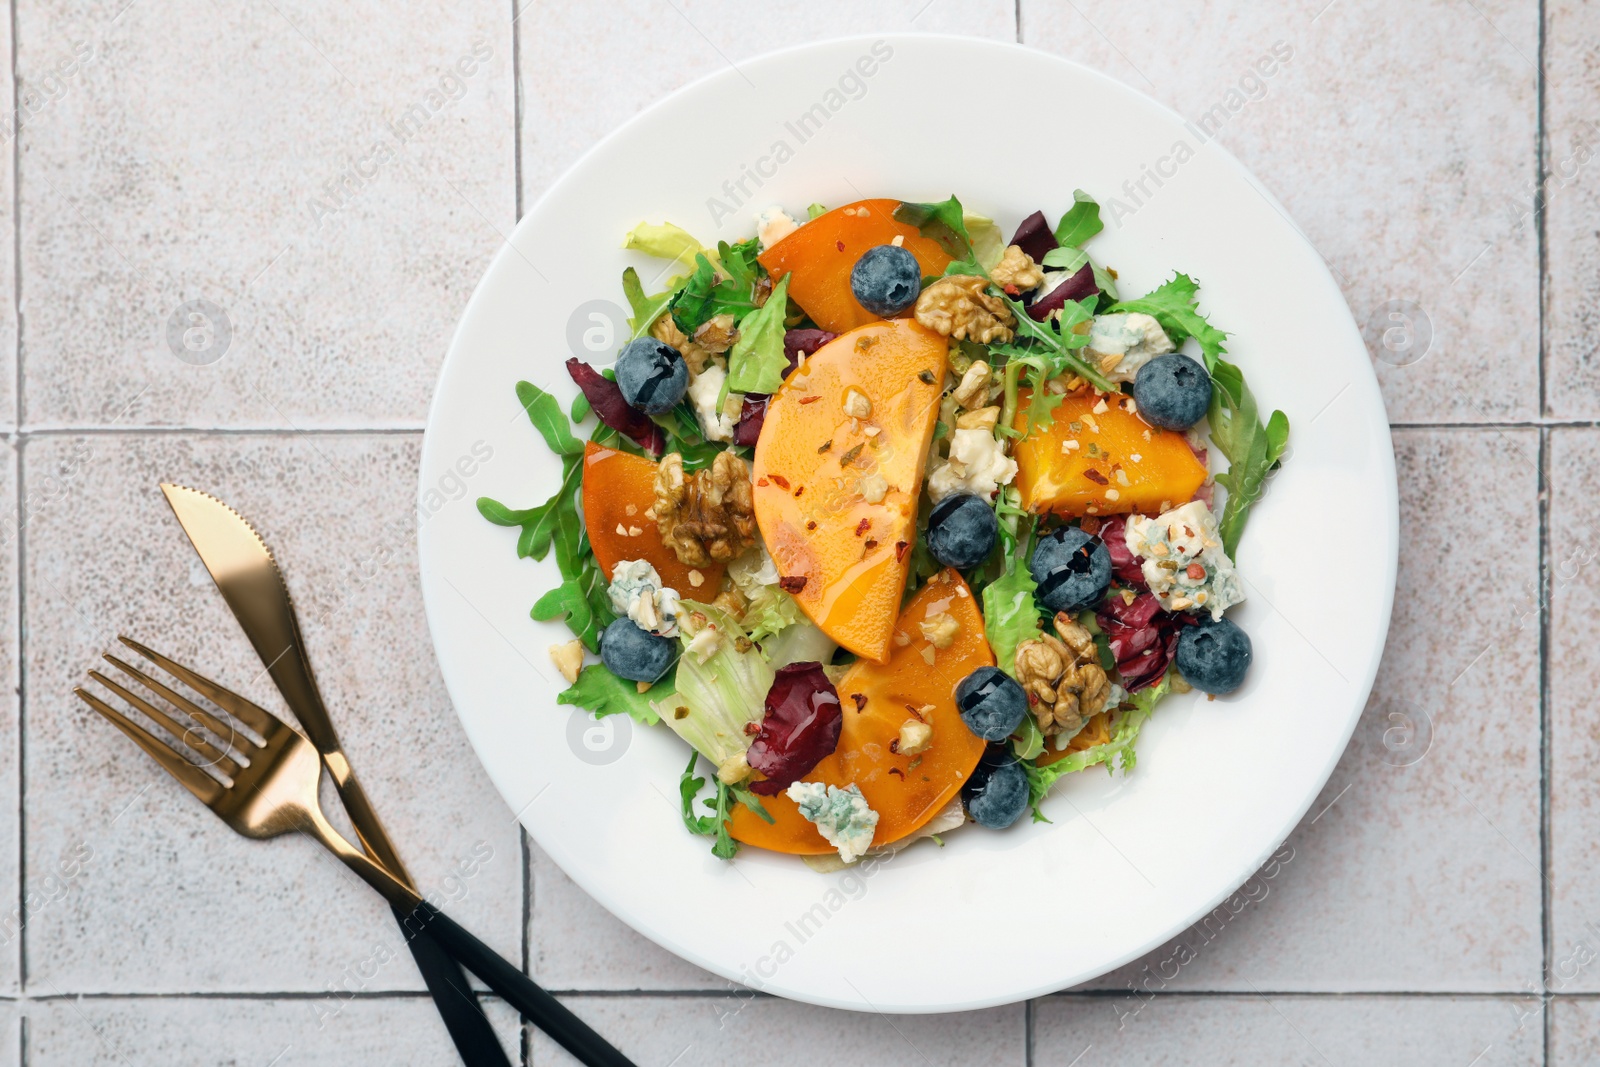 Photo of Delicious persimmon salad, fork and knife on tiled surface, flat lay